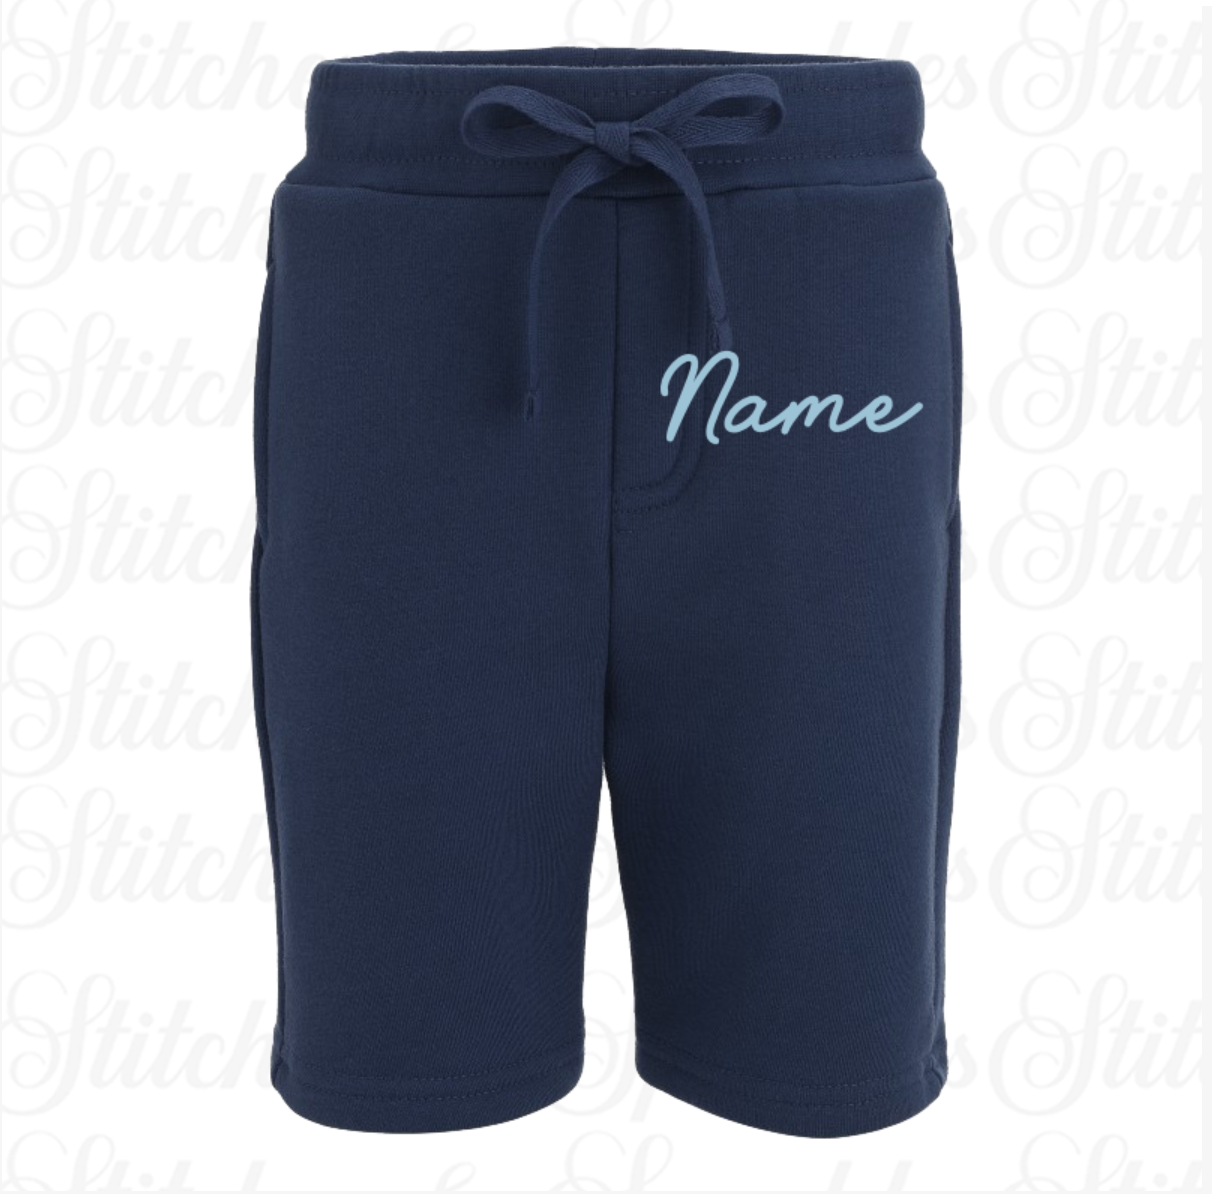 Embroidered Fleece Shorts - Initials or Name